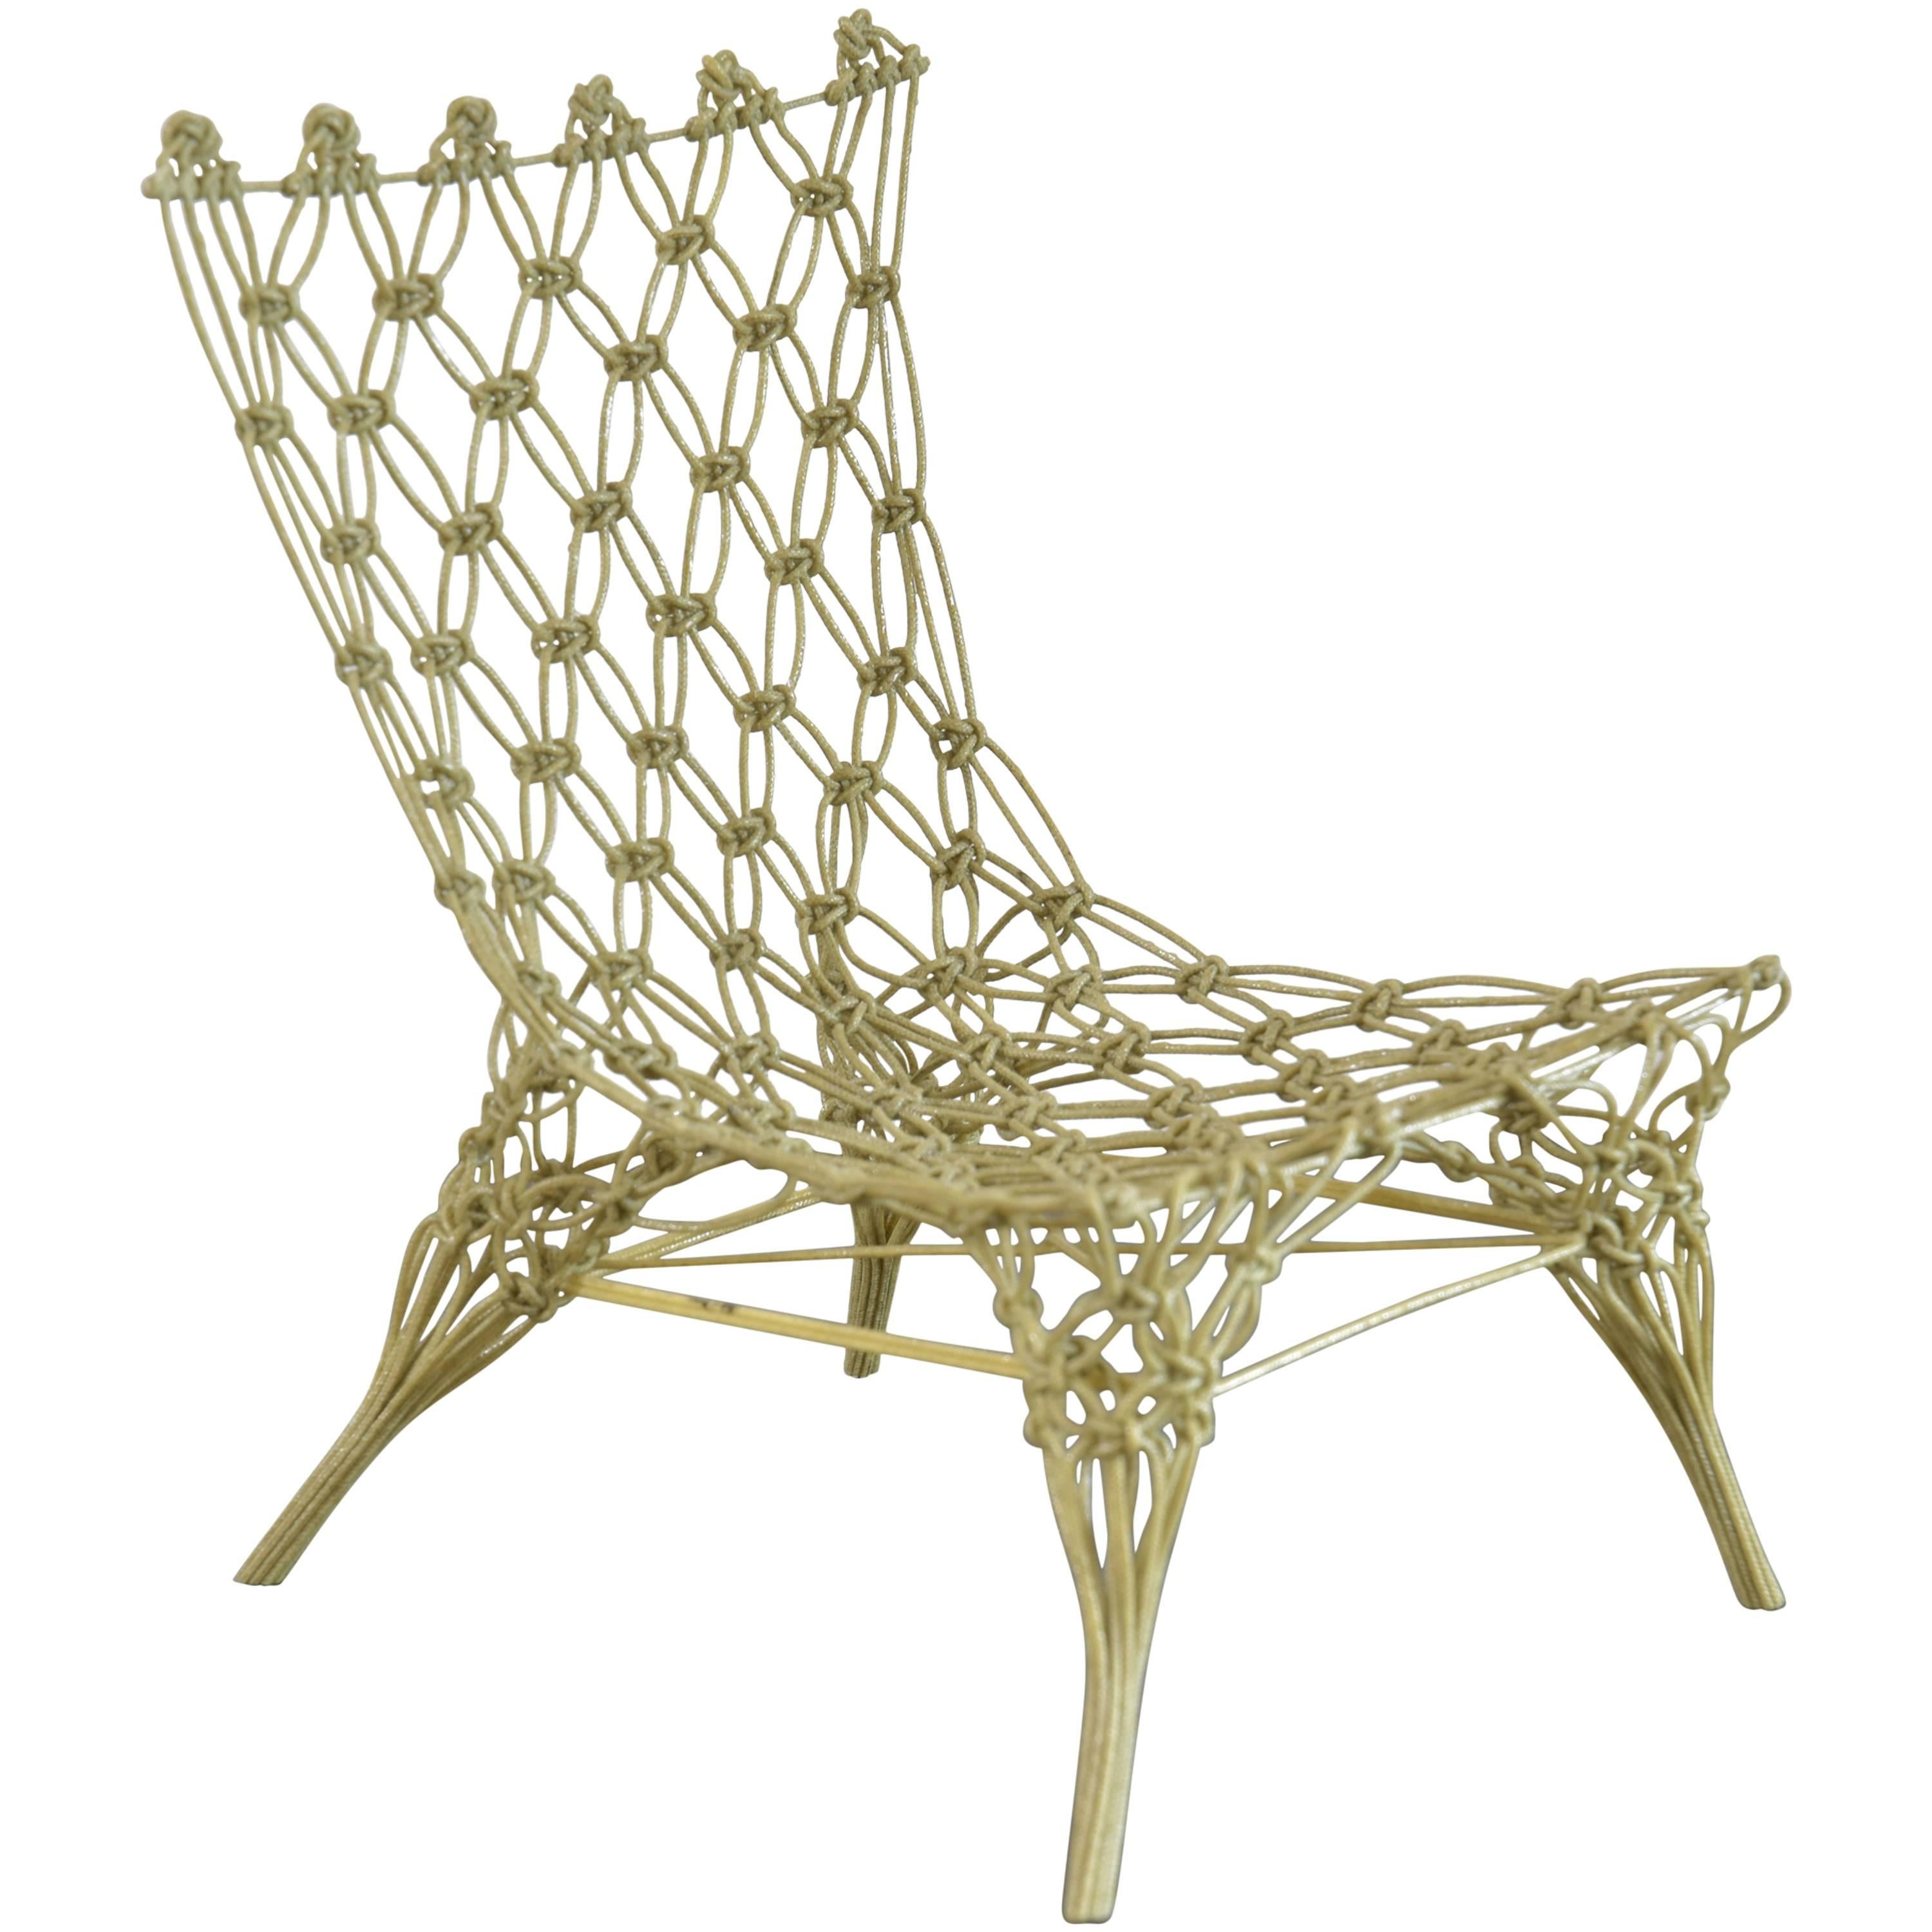 Miniature Marcel Wanders Knotted Chair